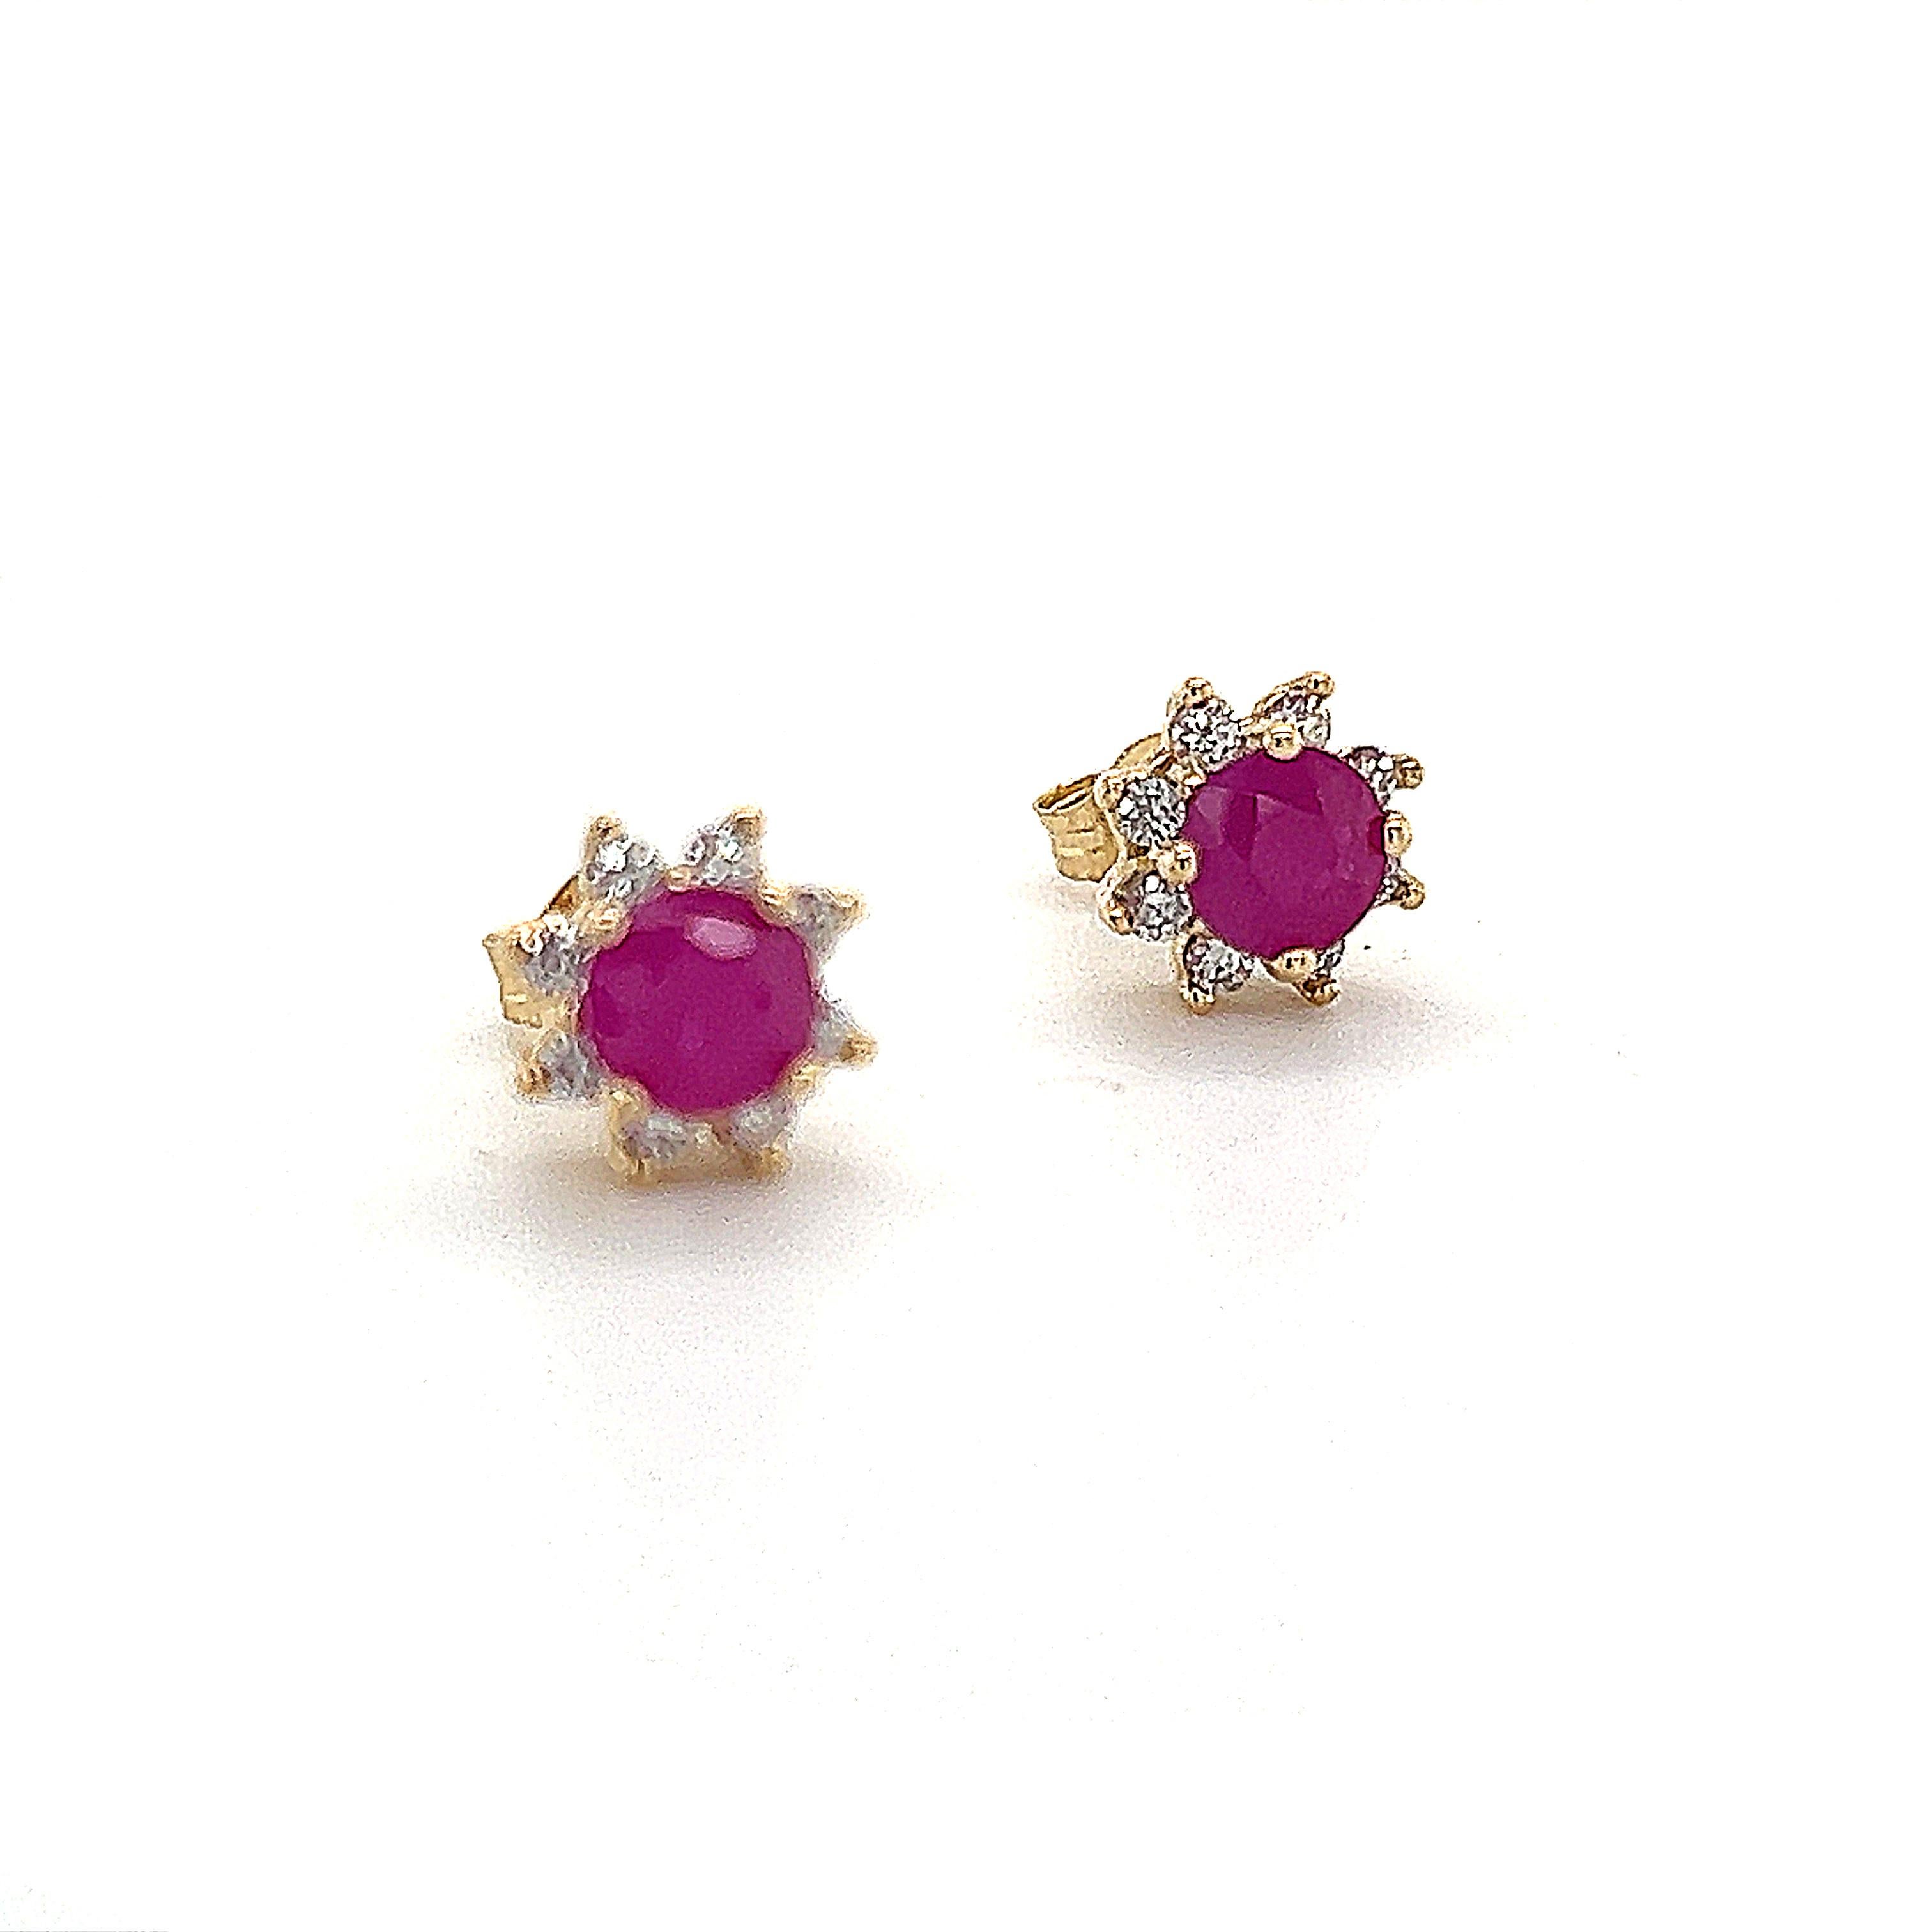 Natural Ruby Diamond Earrings 14k Gold 1.25 TCW Certified For Sale 3